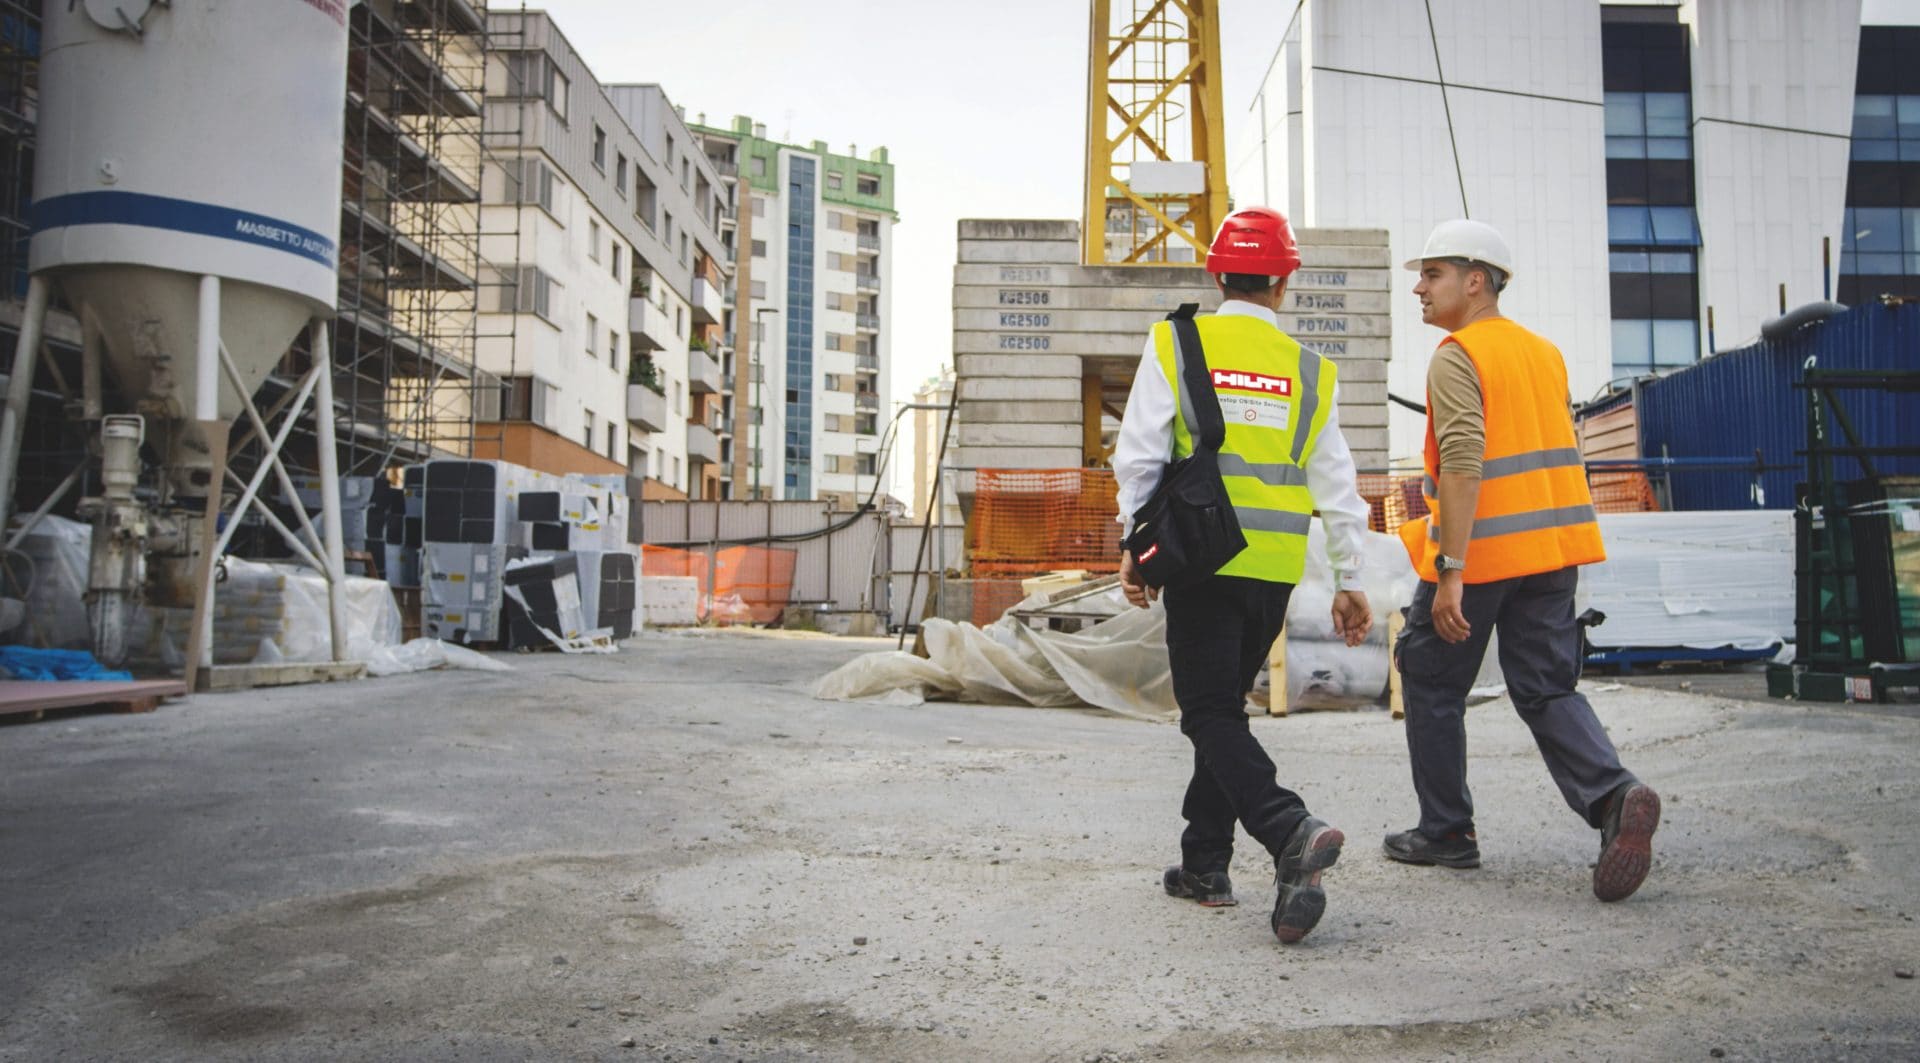 Labour costs and labour shortages in construction are on the rise